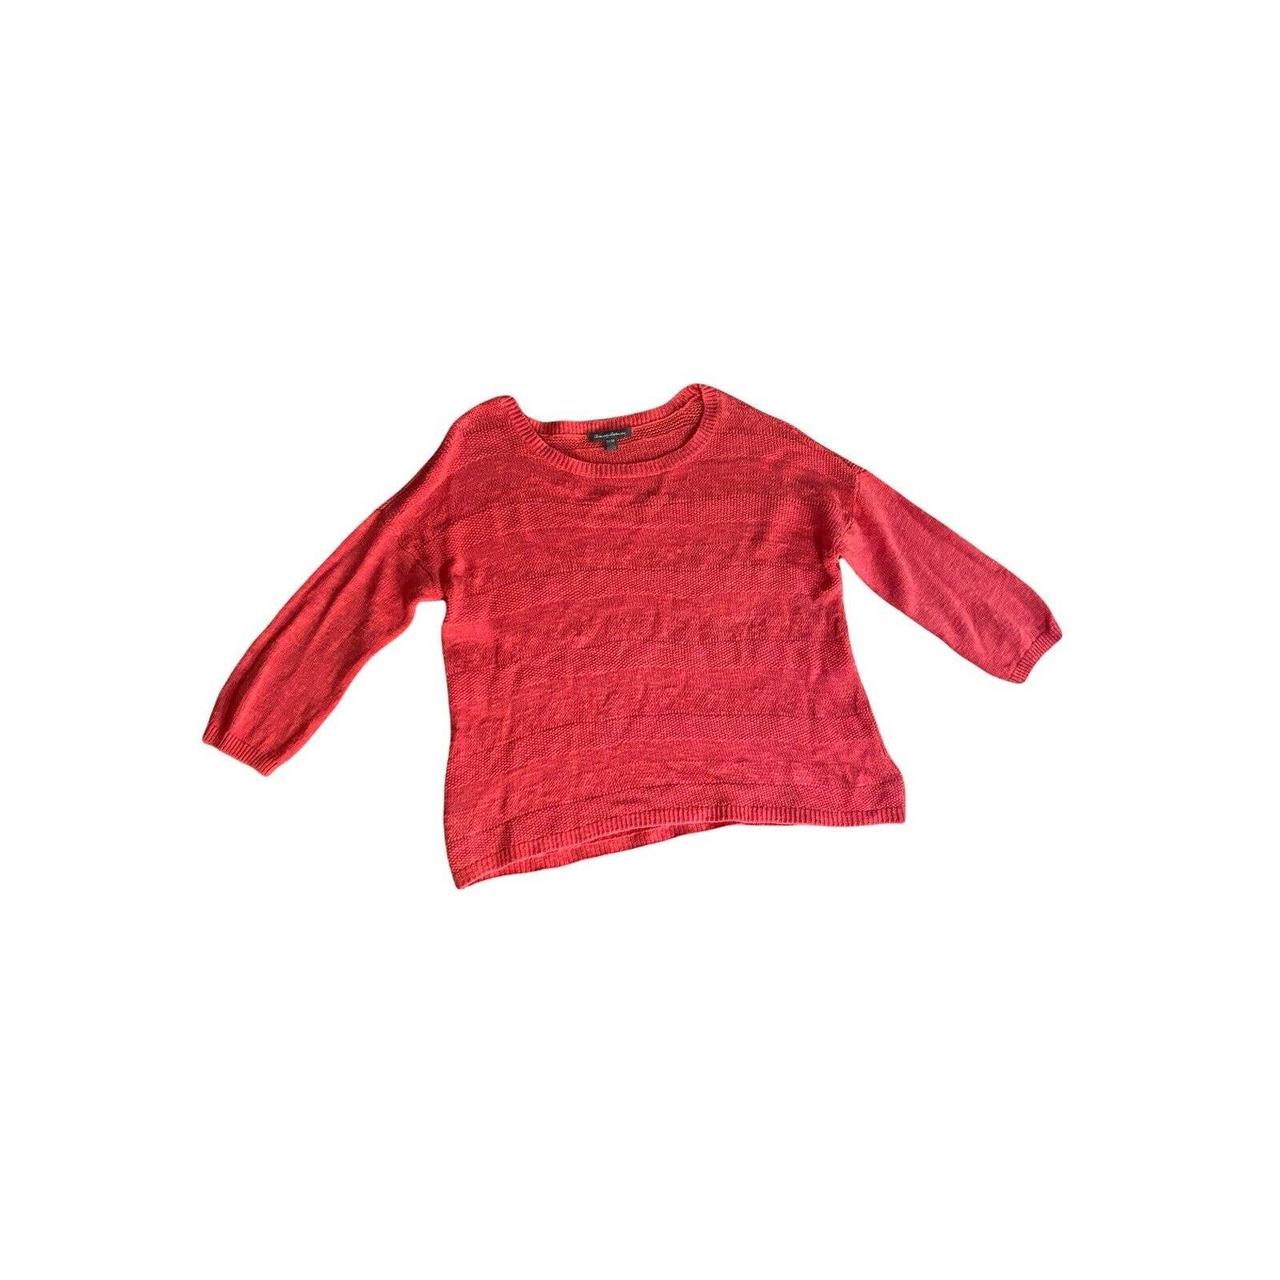 Tommy Bahama Women's Red Jumper